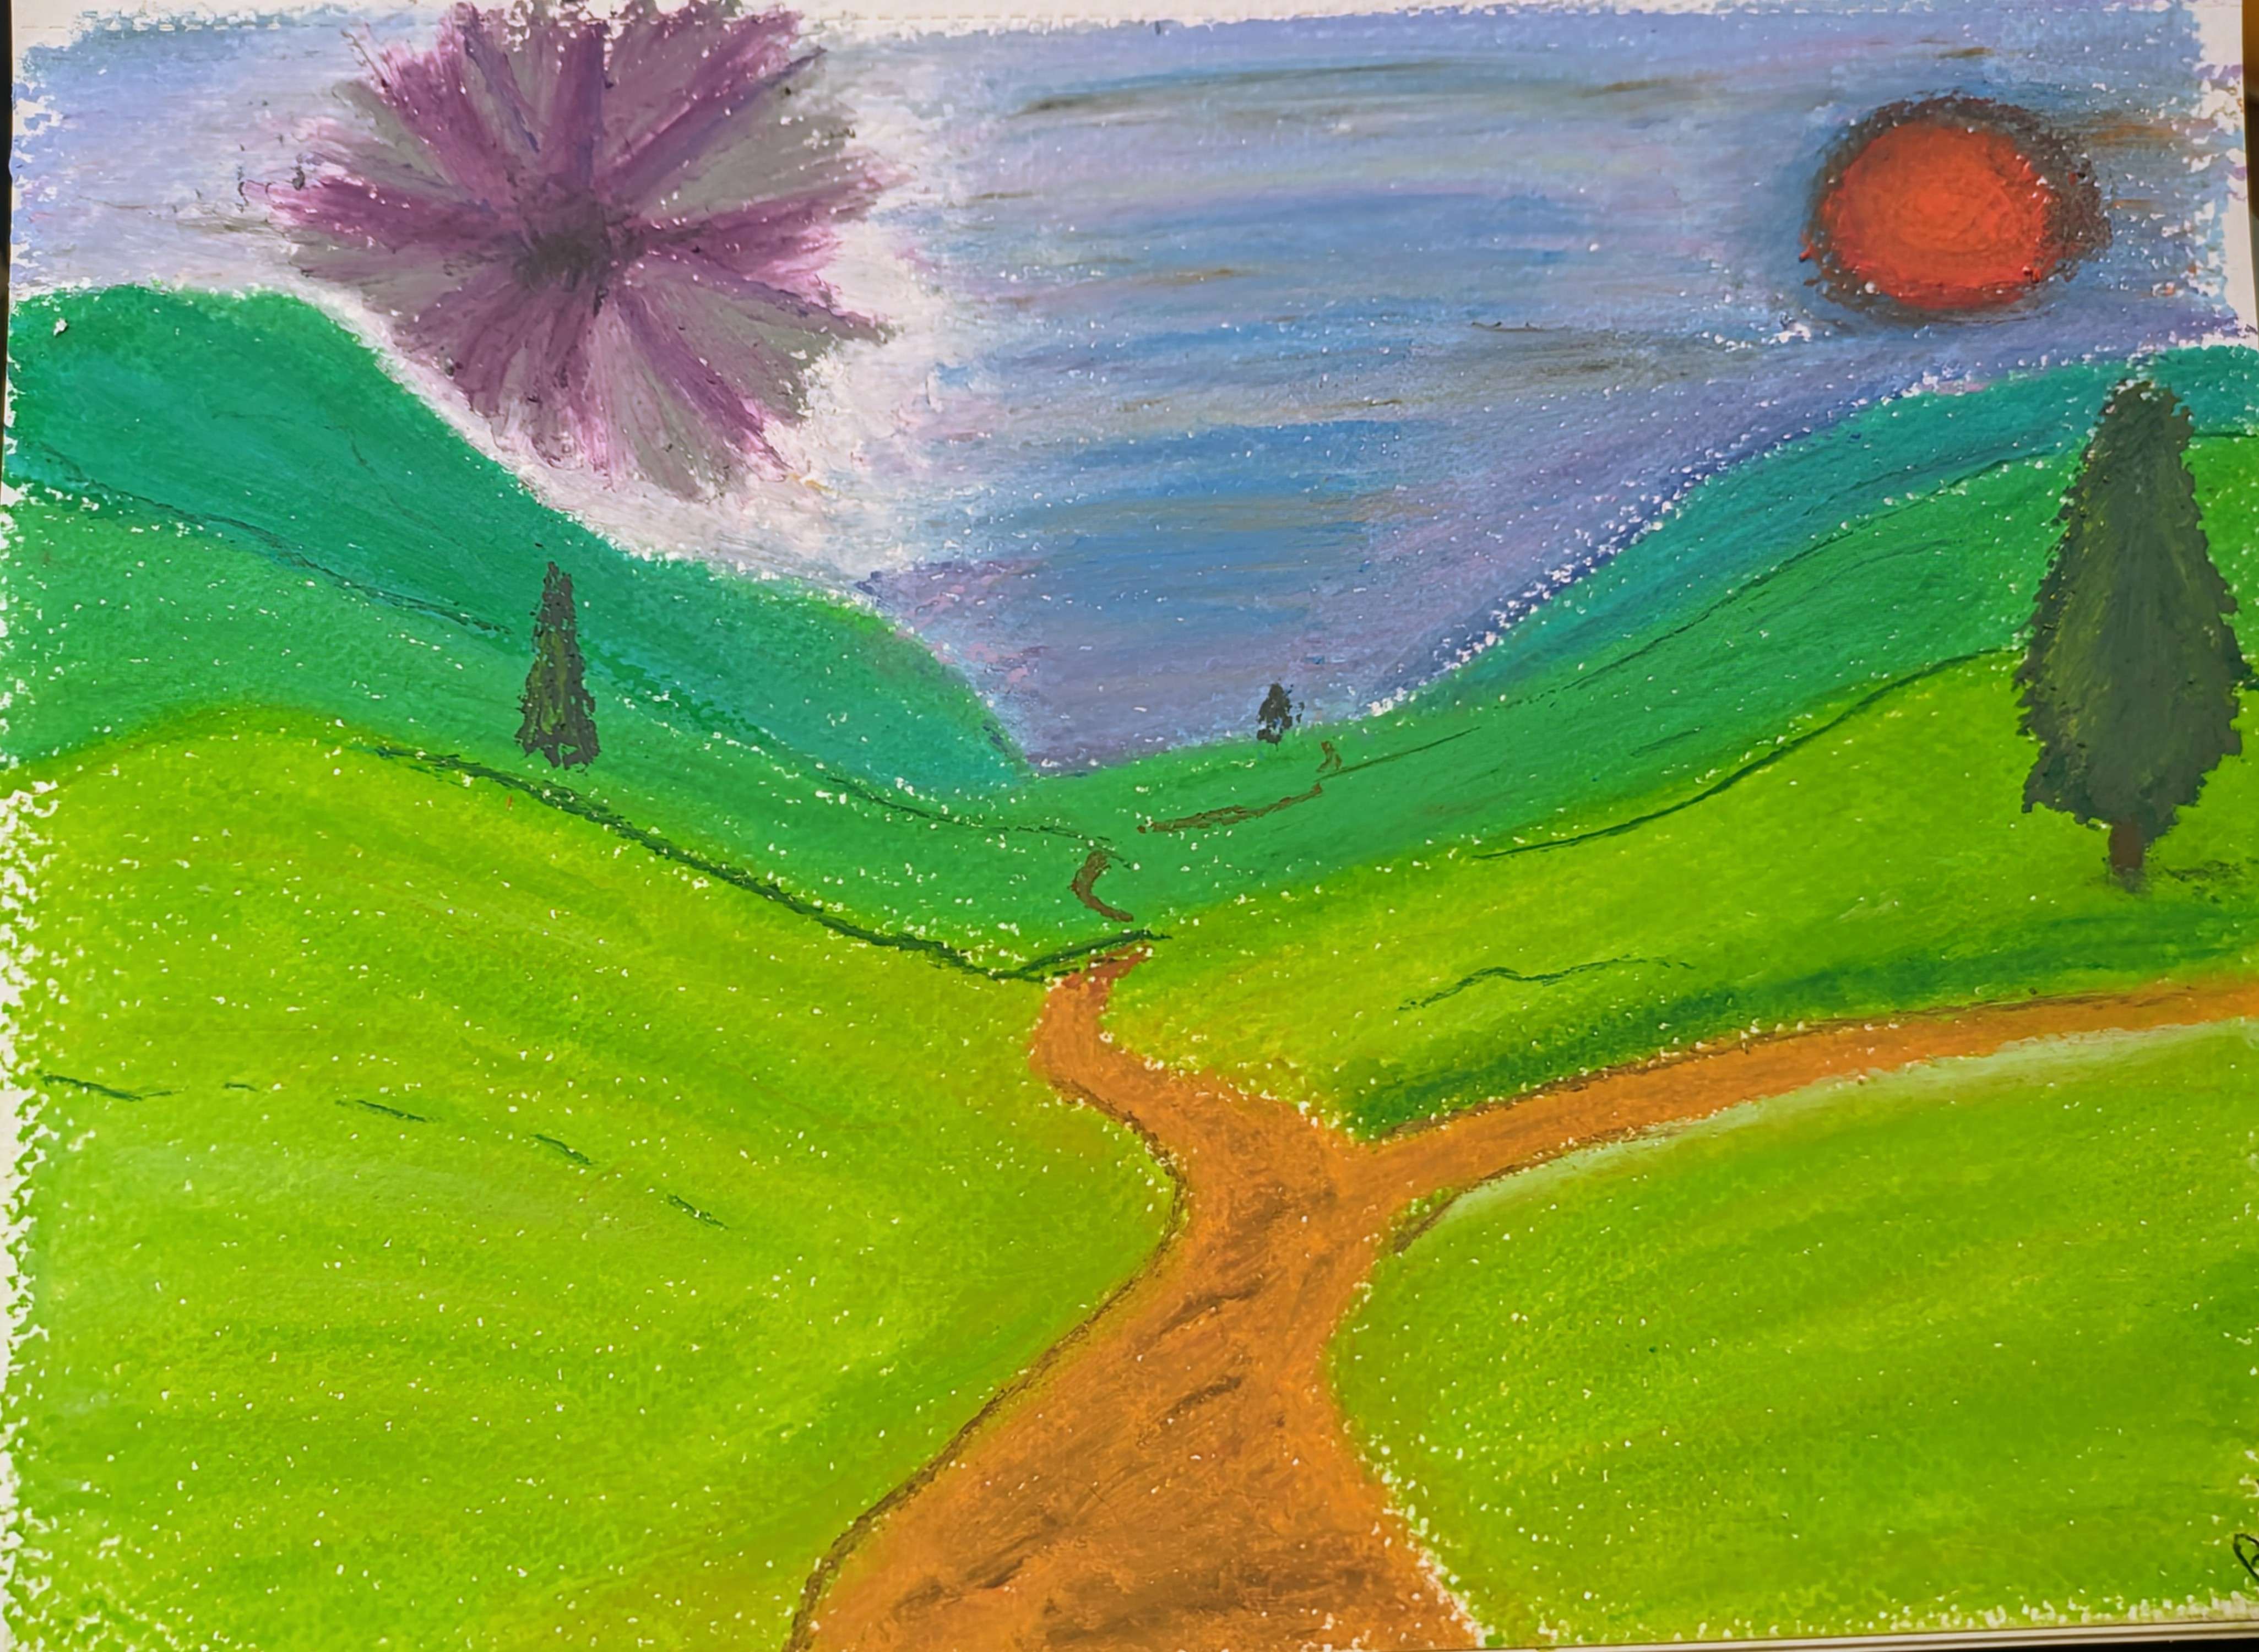 Oil pastel drawing of rolling hills with the occasional tree. A road in the center of the drawing leads through the hills. The sky has two focal points, a blood-red sun and a deep purple 'hole' surrounded by white light.